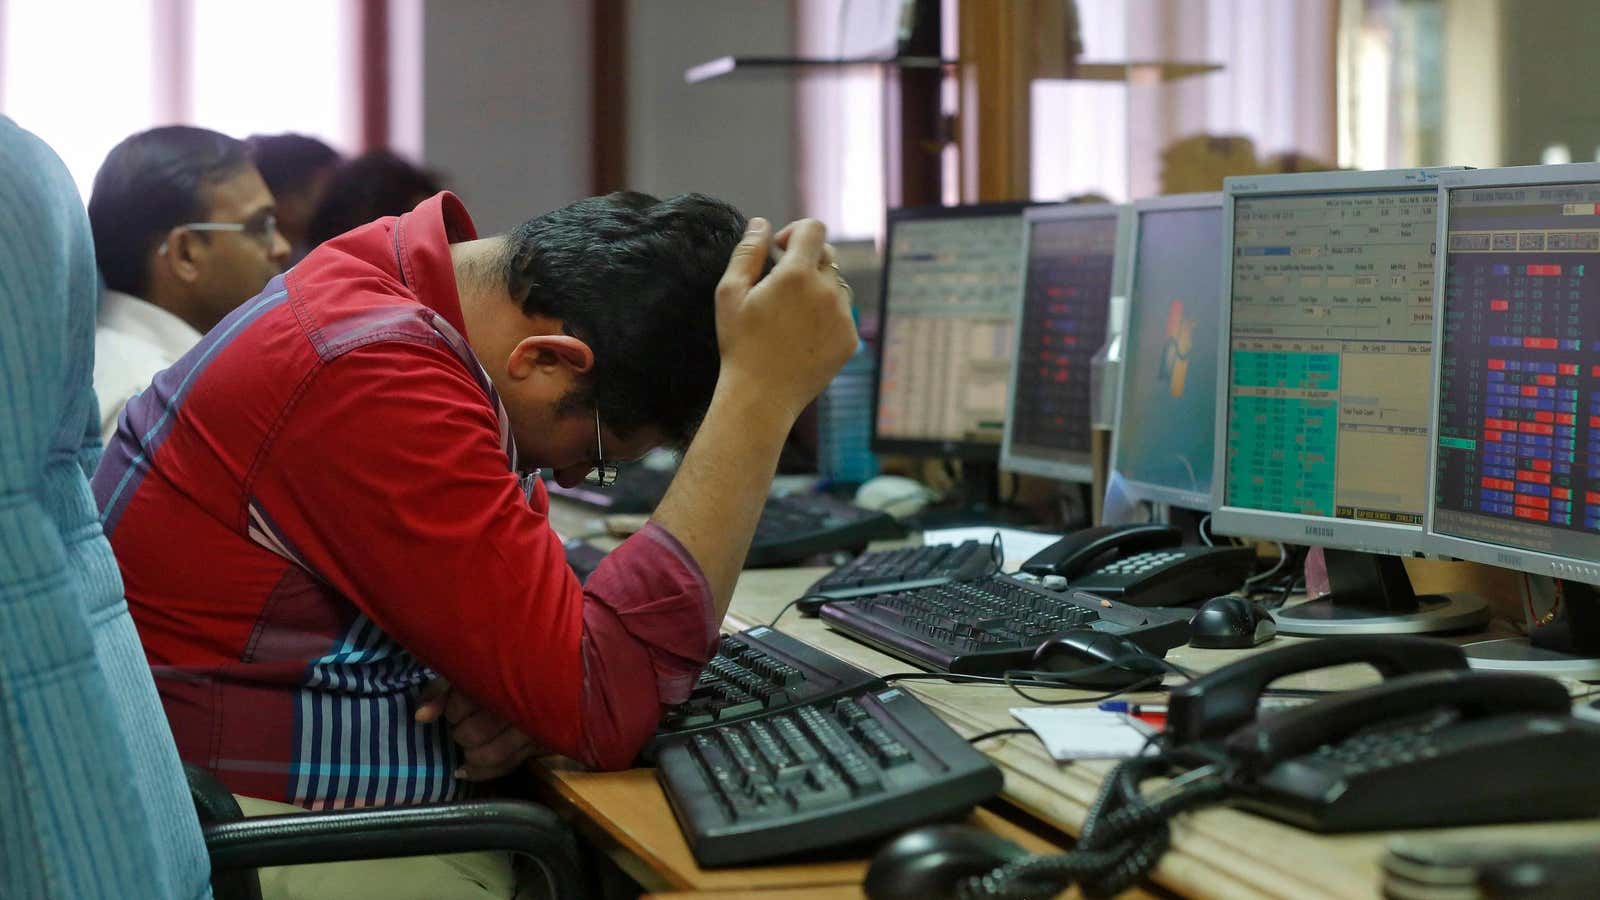 India's tech stocks have fallen the most since the 2008 financial crisis